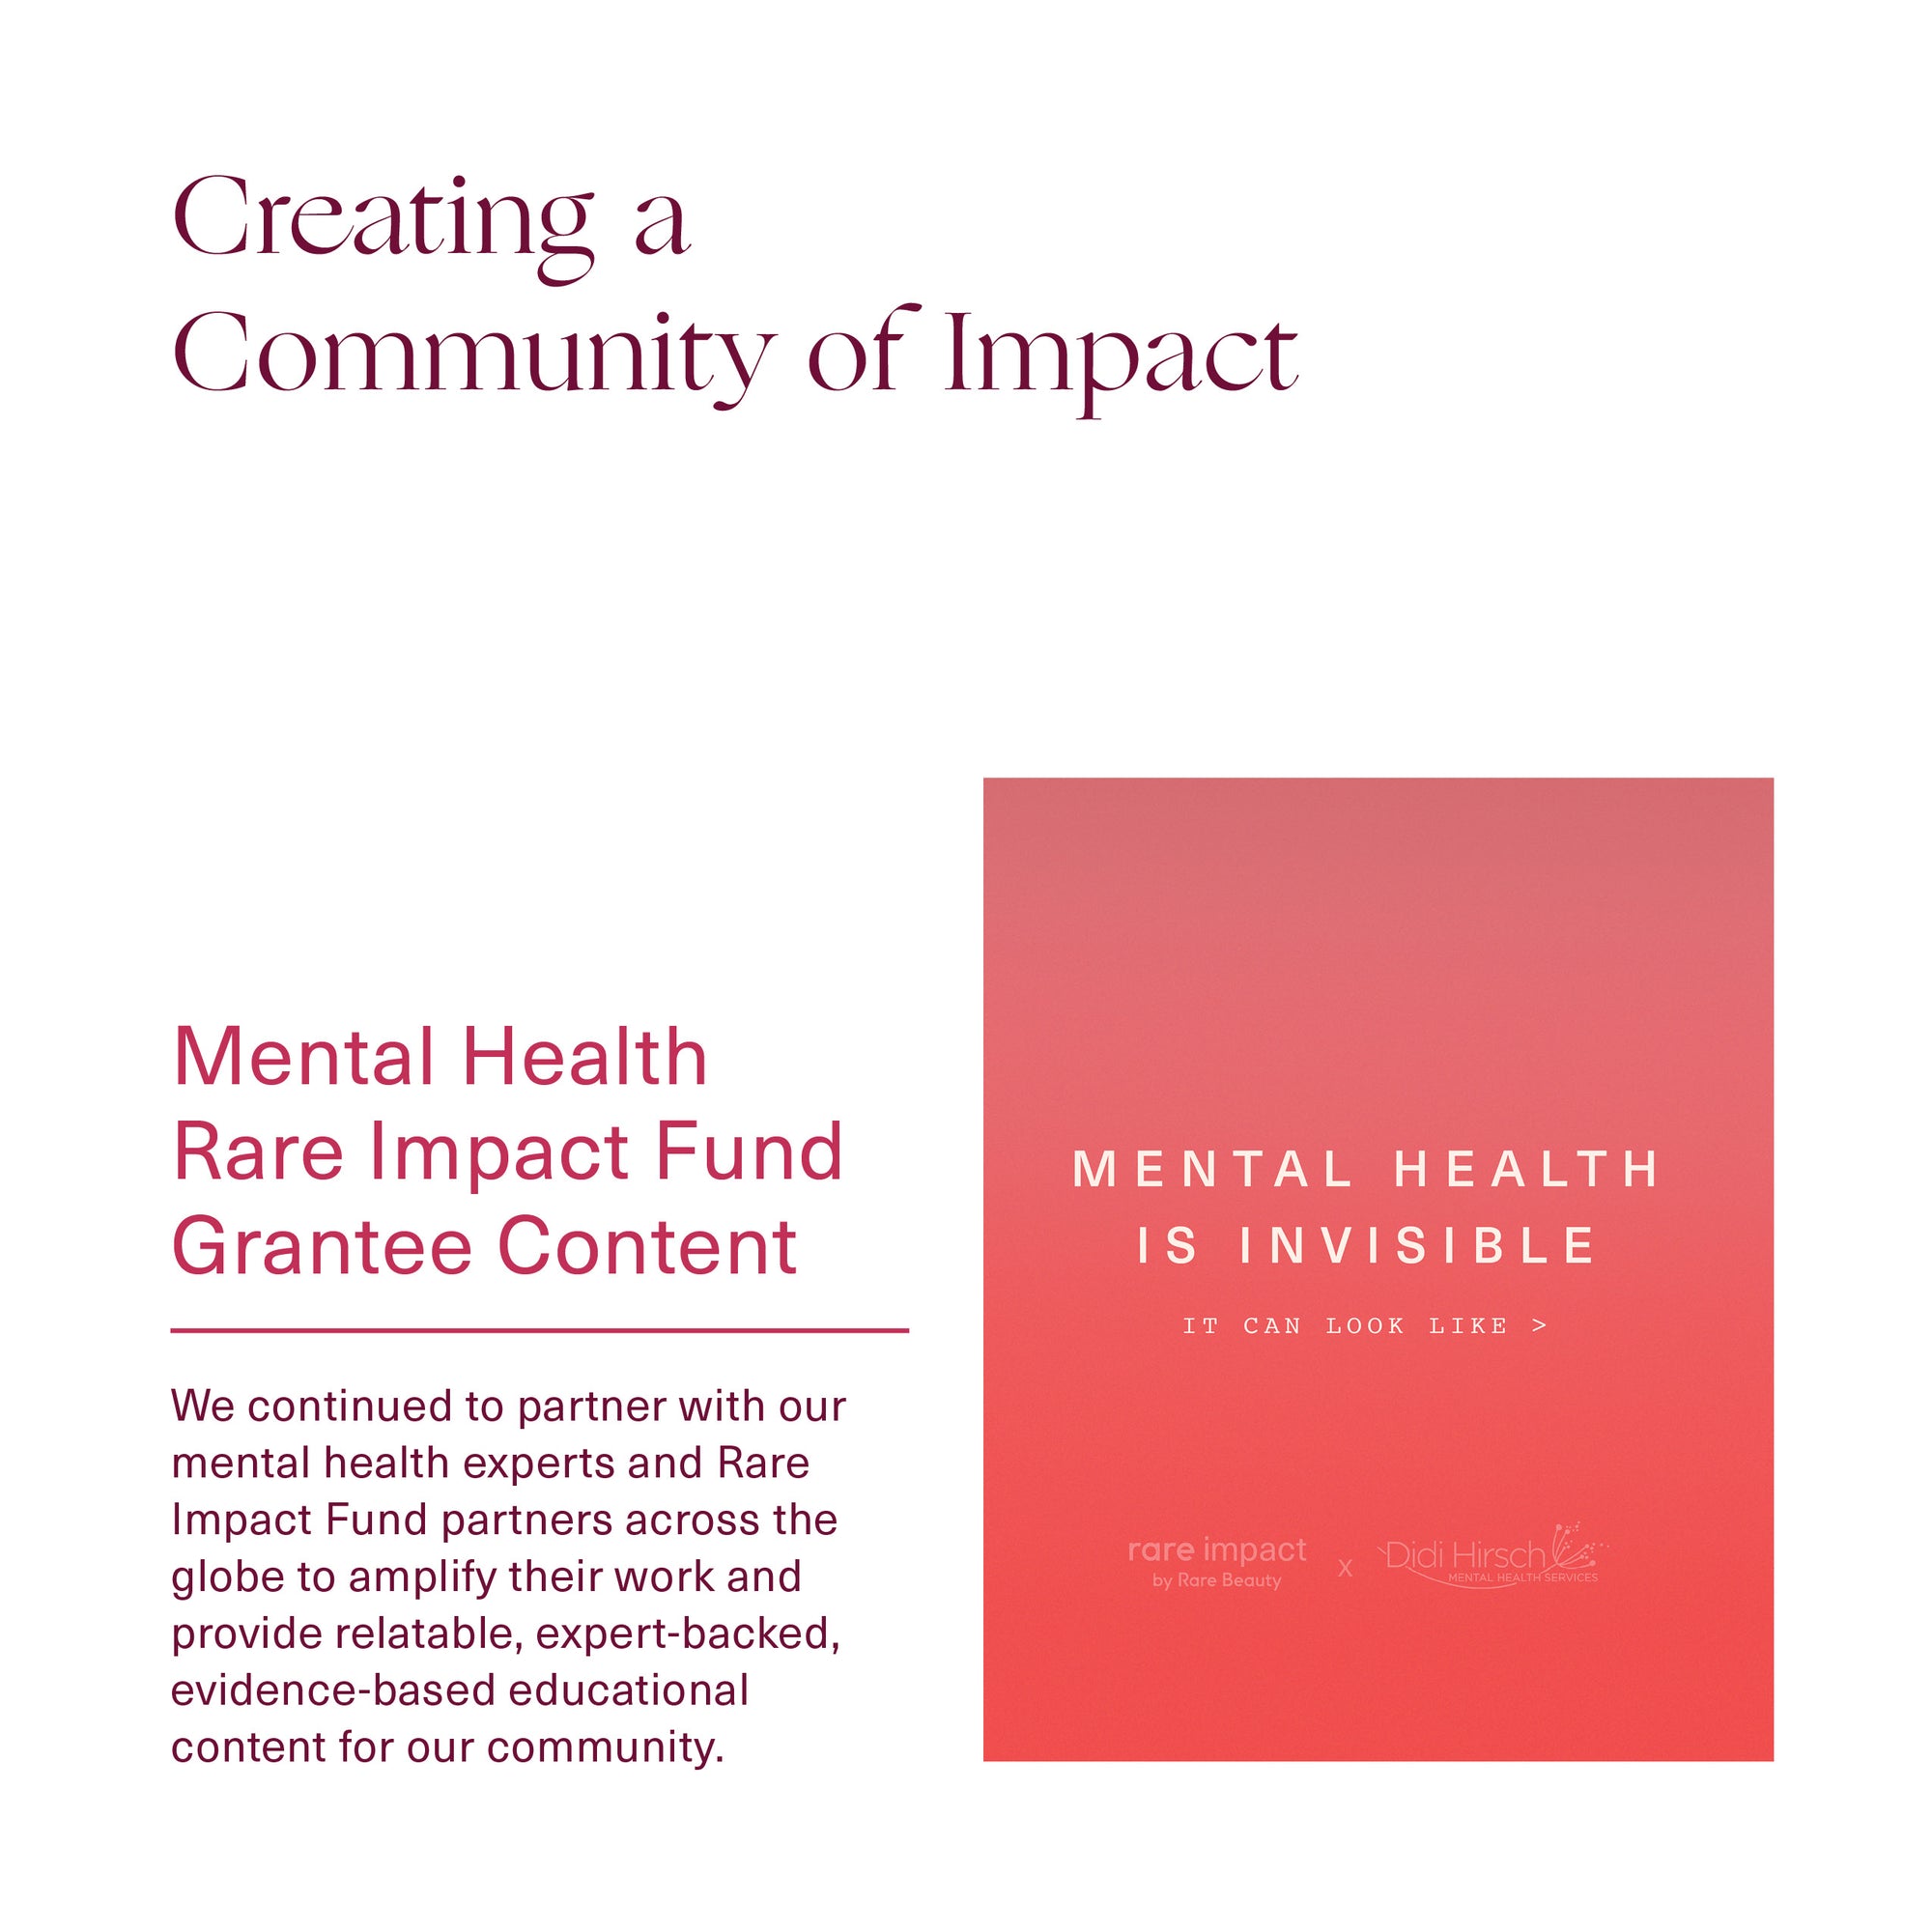 Creating a community of Impact - Mental Health Rare Impact Fund Grantee Content